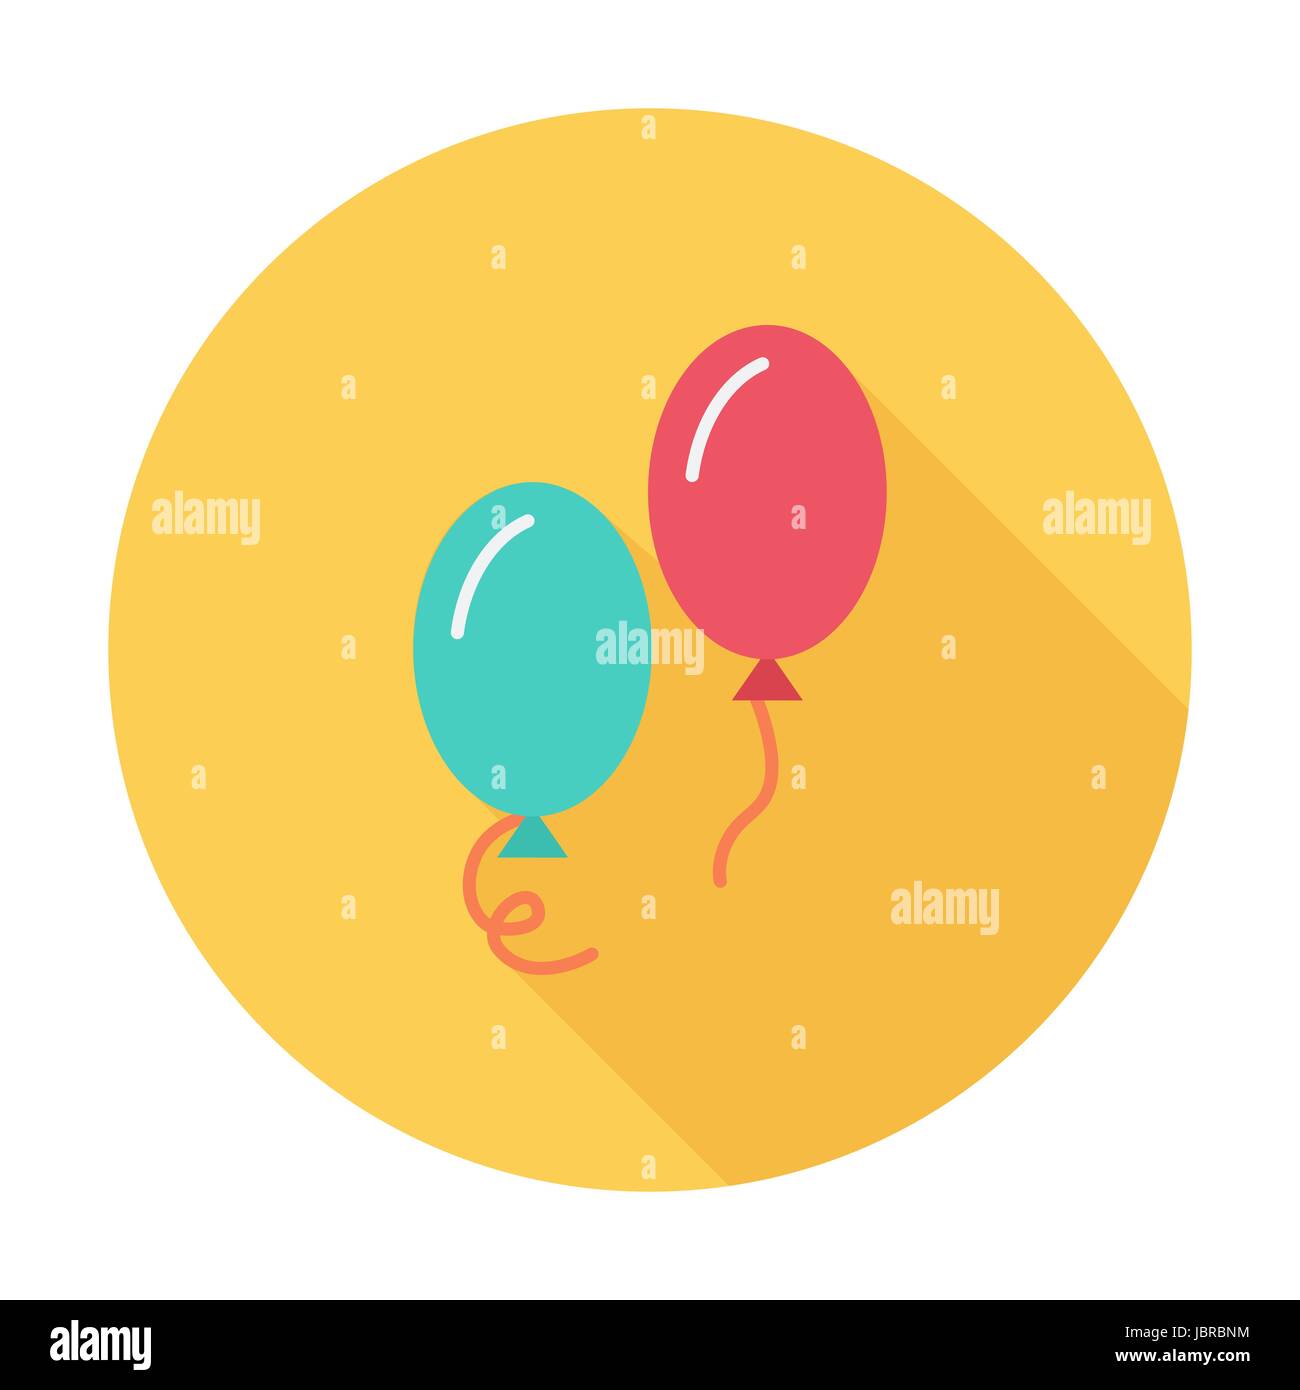 Ballon icon icon. Flat vector related icon with long shadow for web and mobile applications. It can be used as - logo, pictogram, icon, infographic el Stock Vector